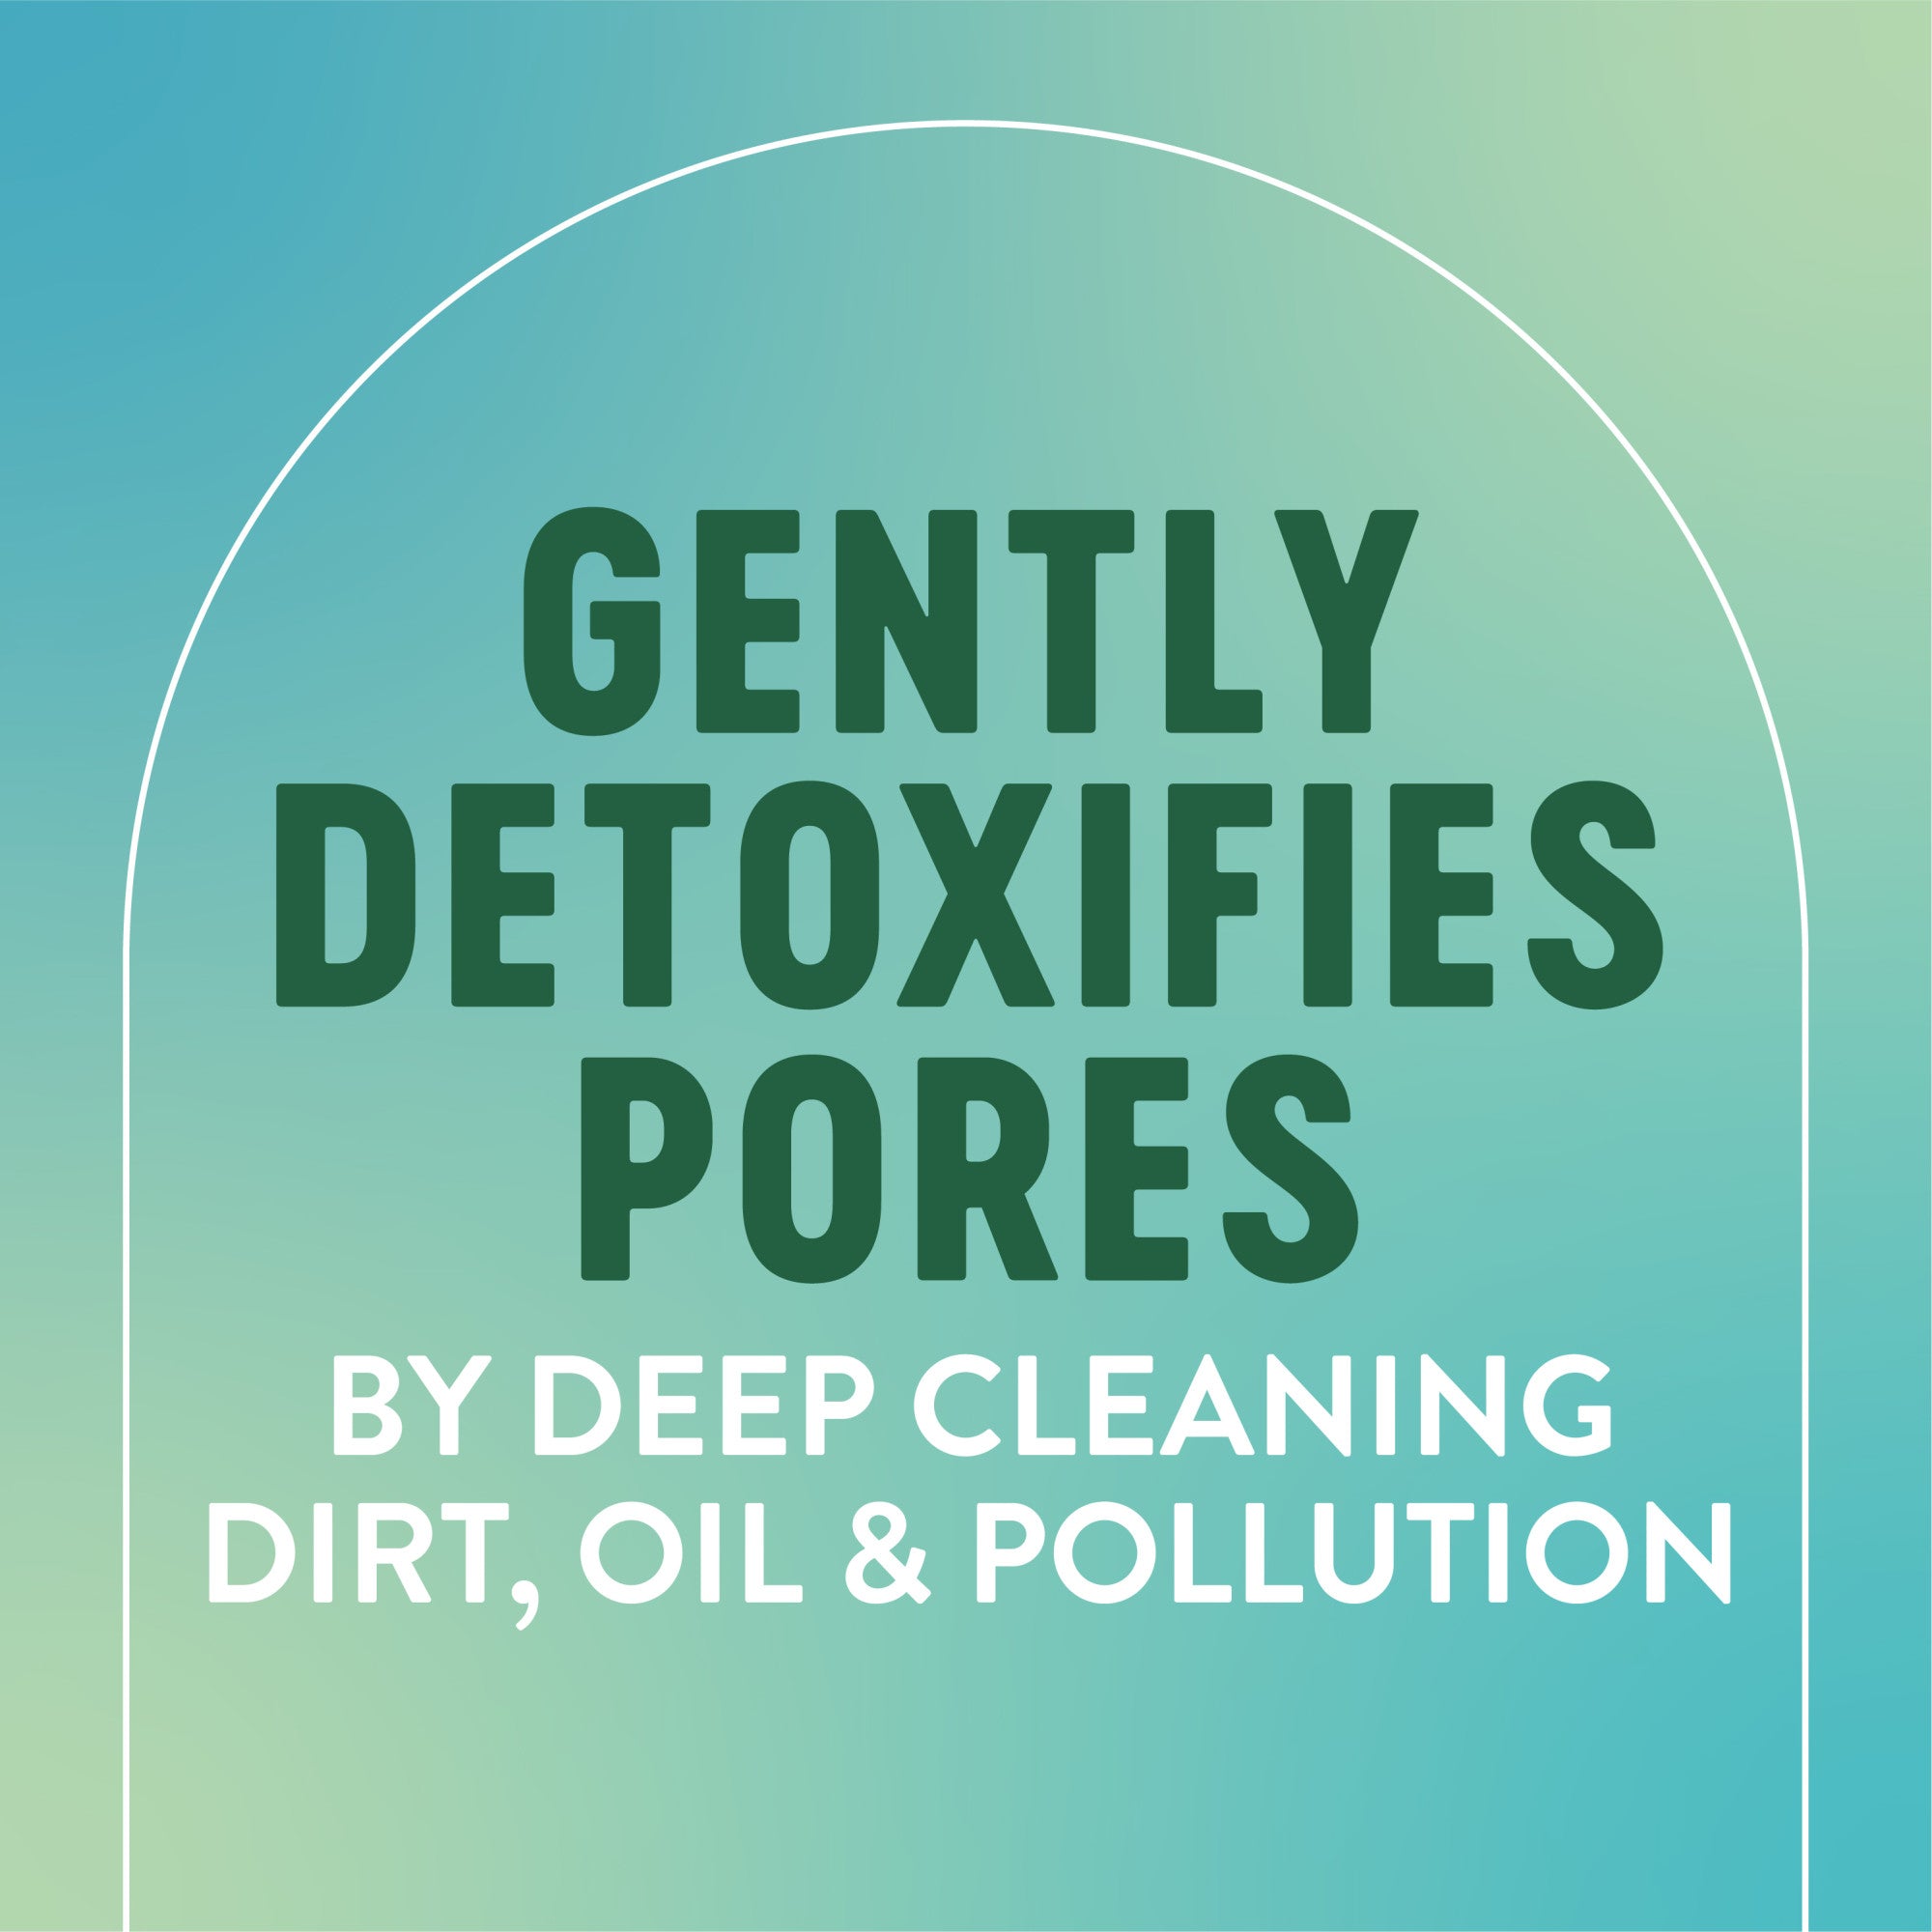 Gently detoxifies pores by deep cleaning dirt, oil and pollution.